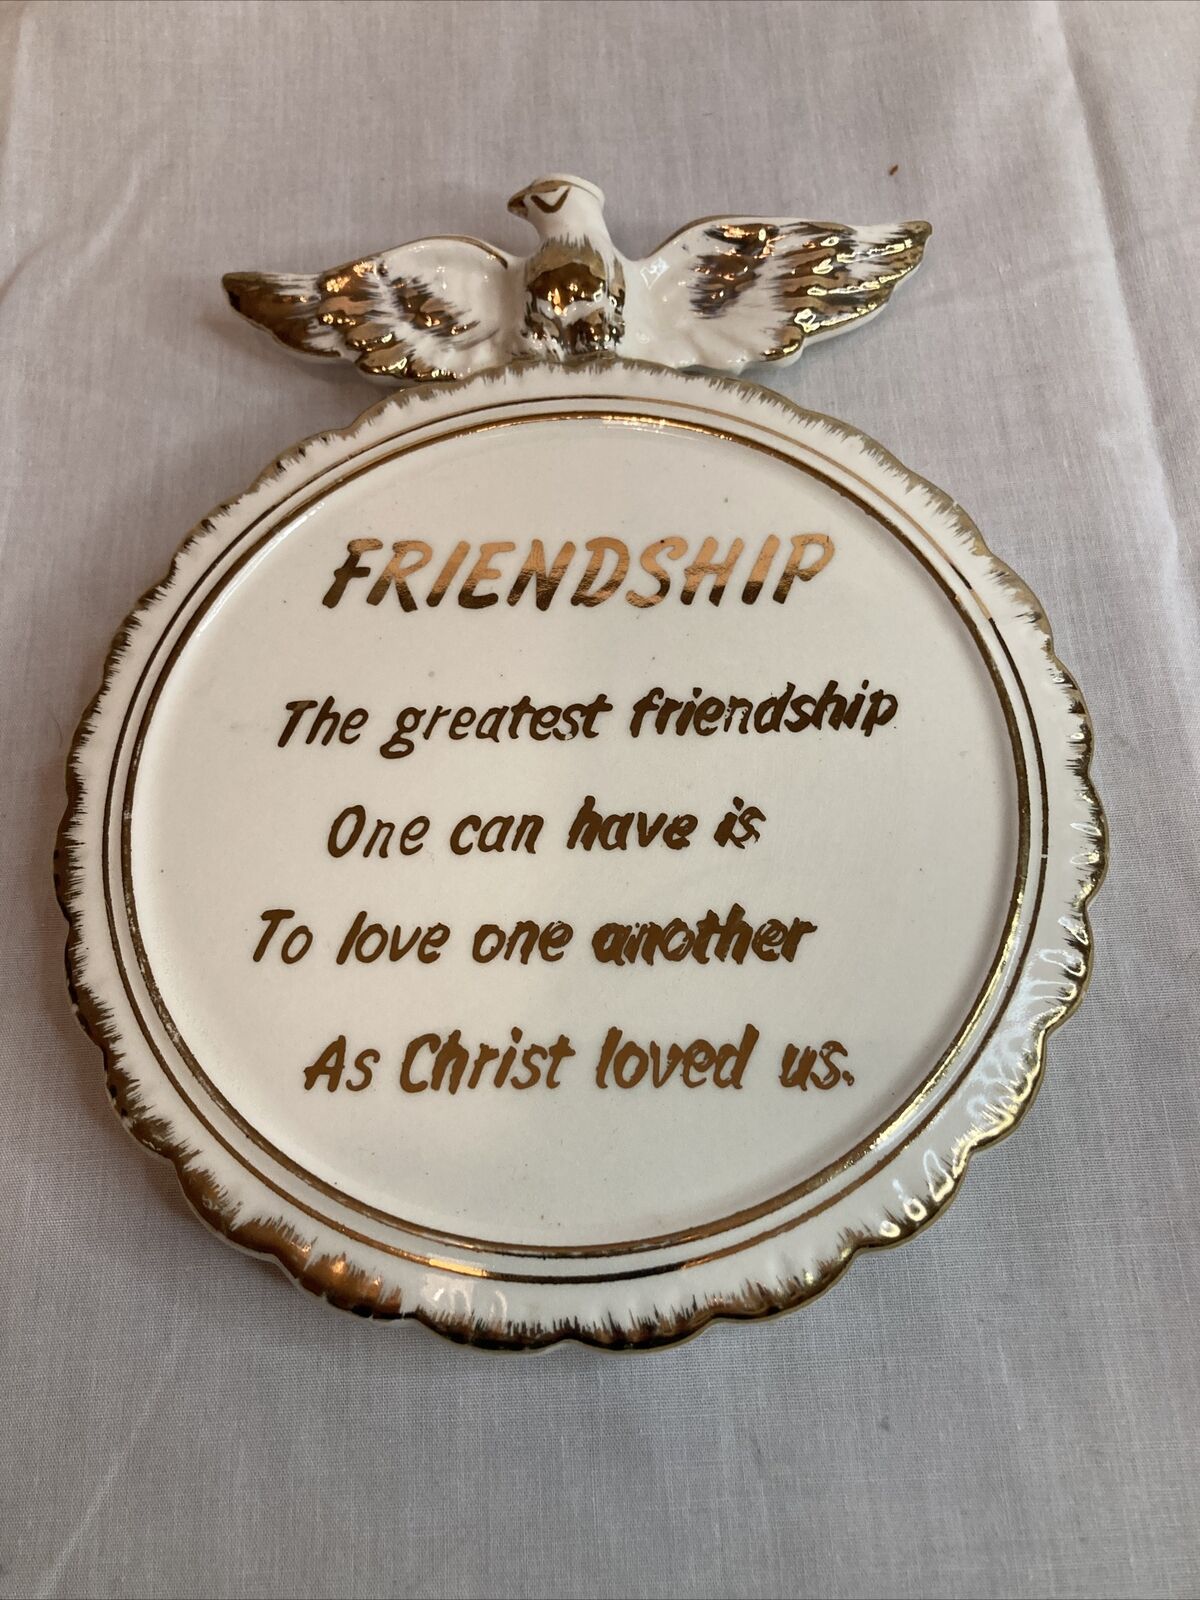 Vintage “AS CHRIST LOVED US” Ceramic Friendship Wall Plaque w/ Eagle 7.5”x6\